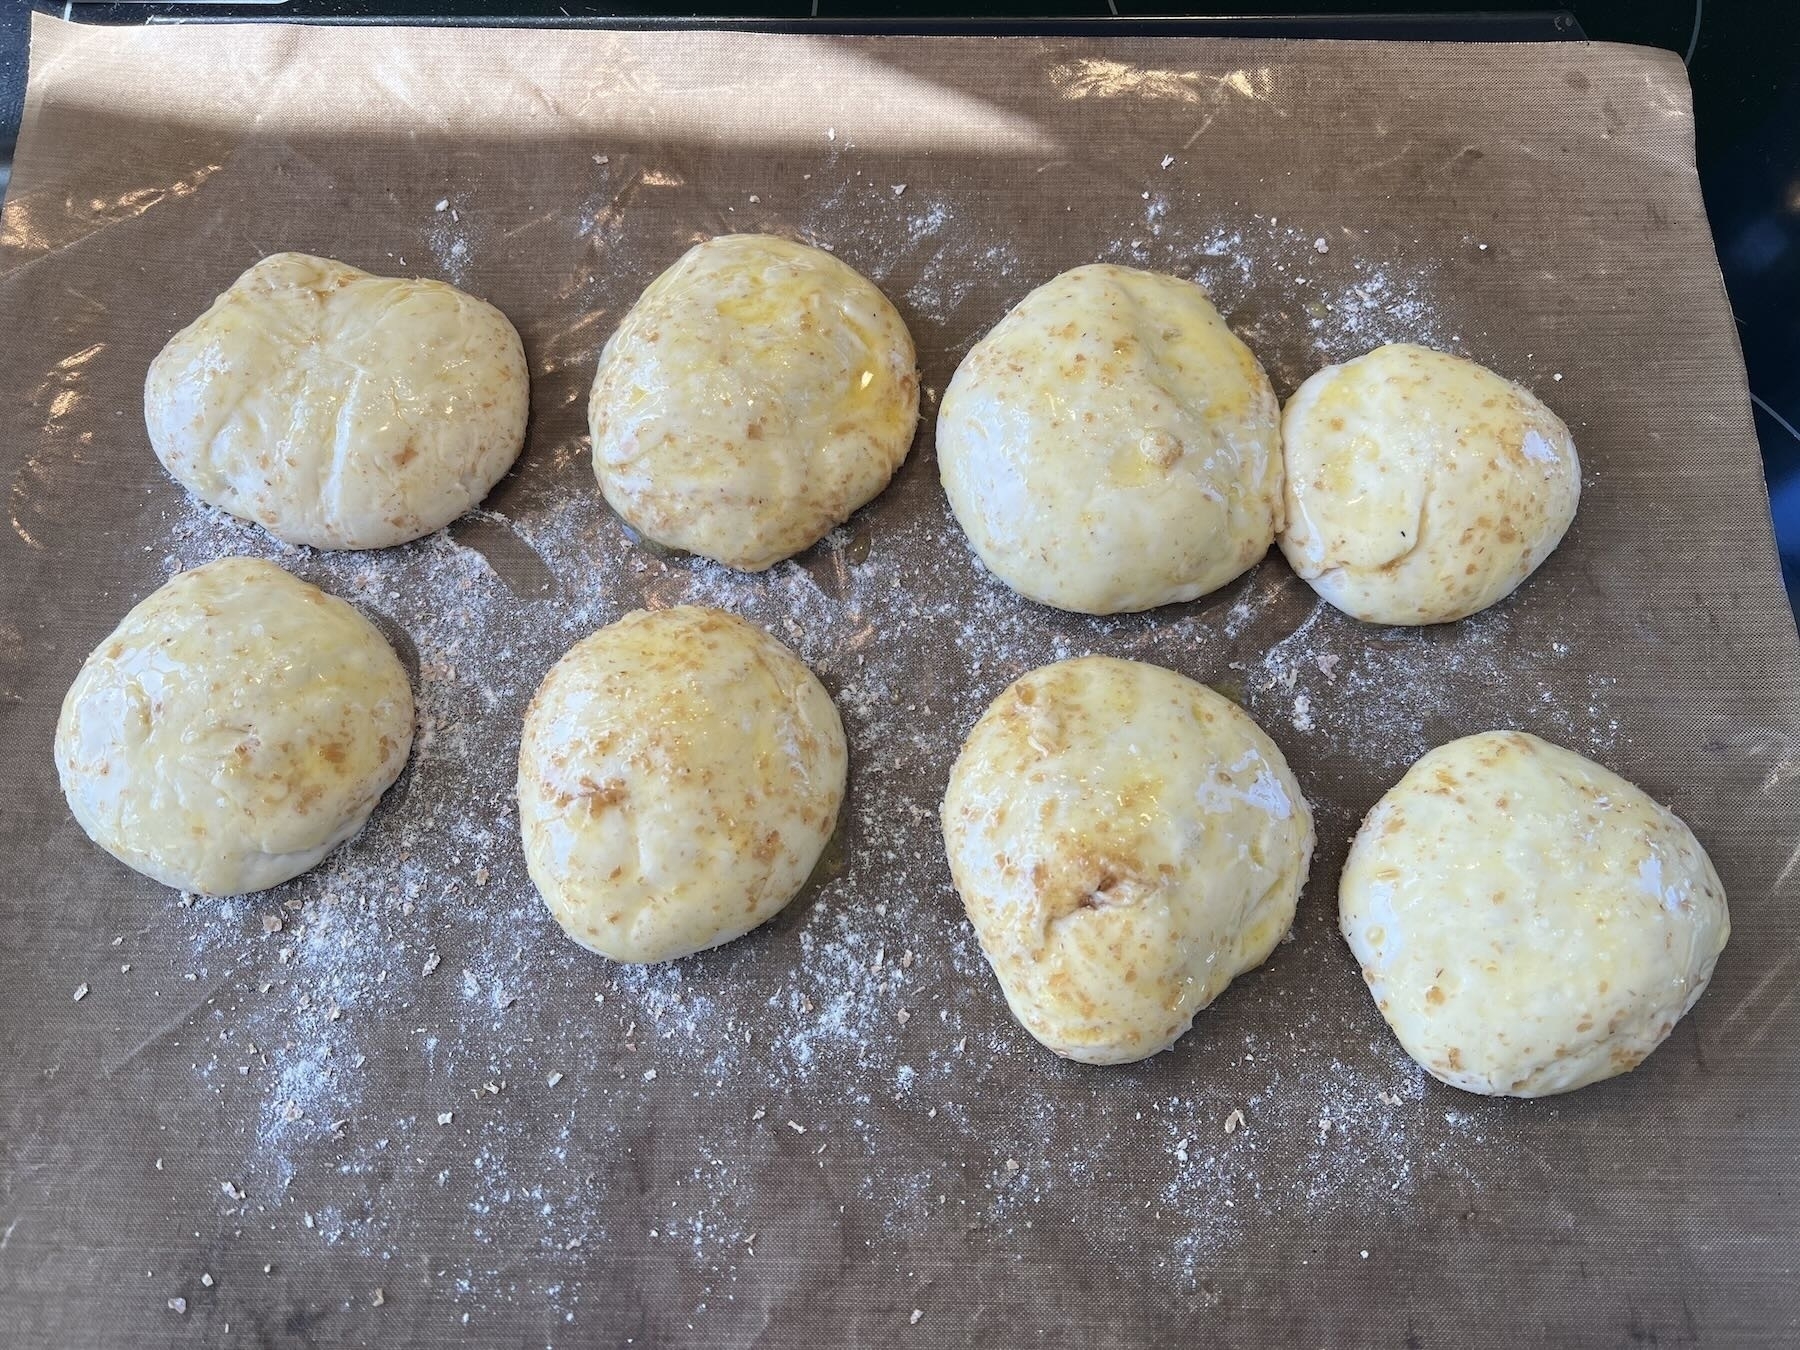 French Bread rolls with butter glaze before baking.